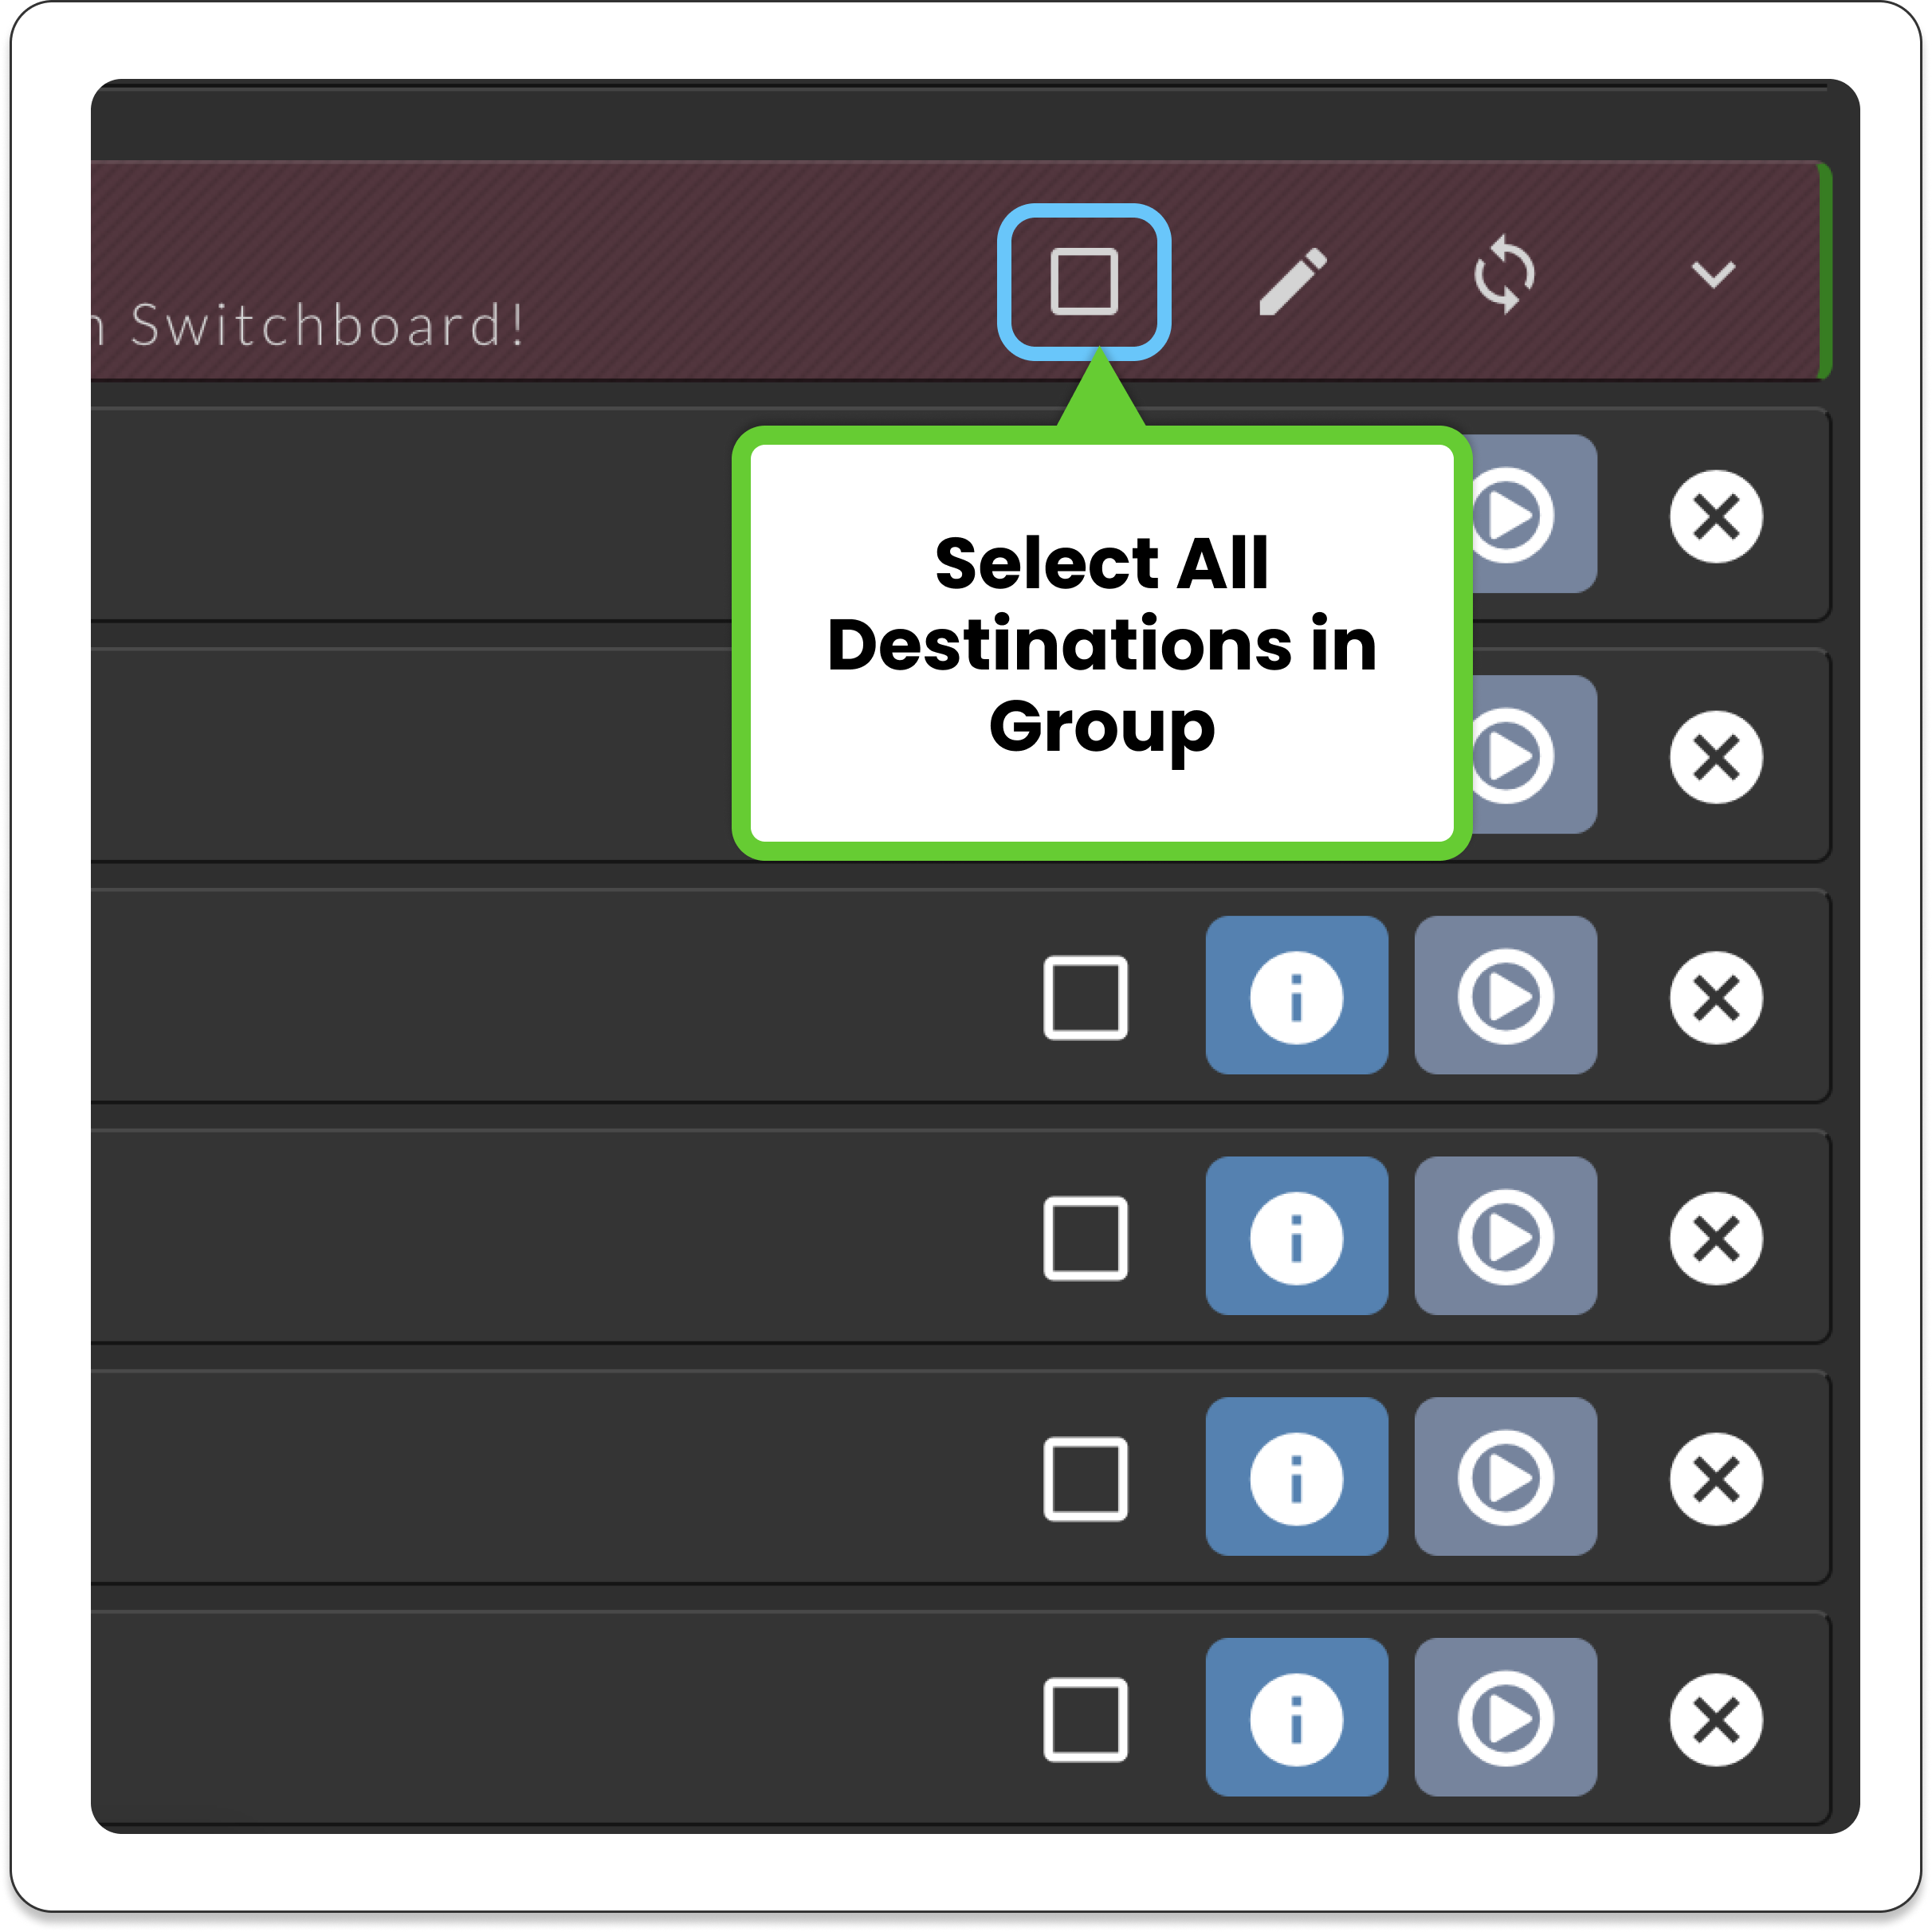 switchboardlive_workflow-page_destinations_pane_select-all-checkbox.png